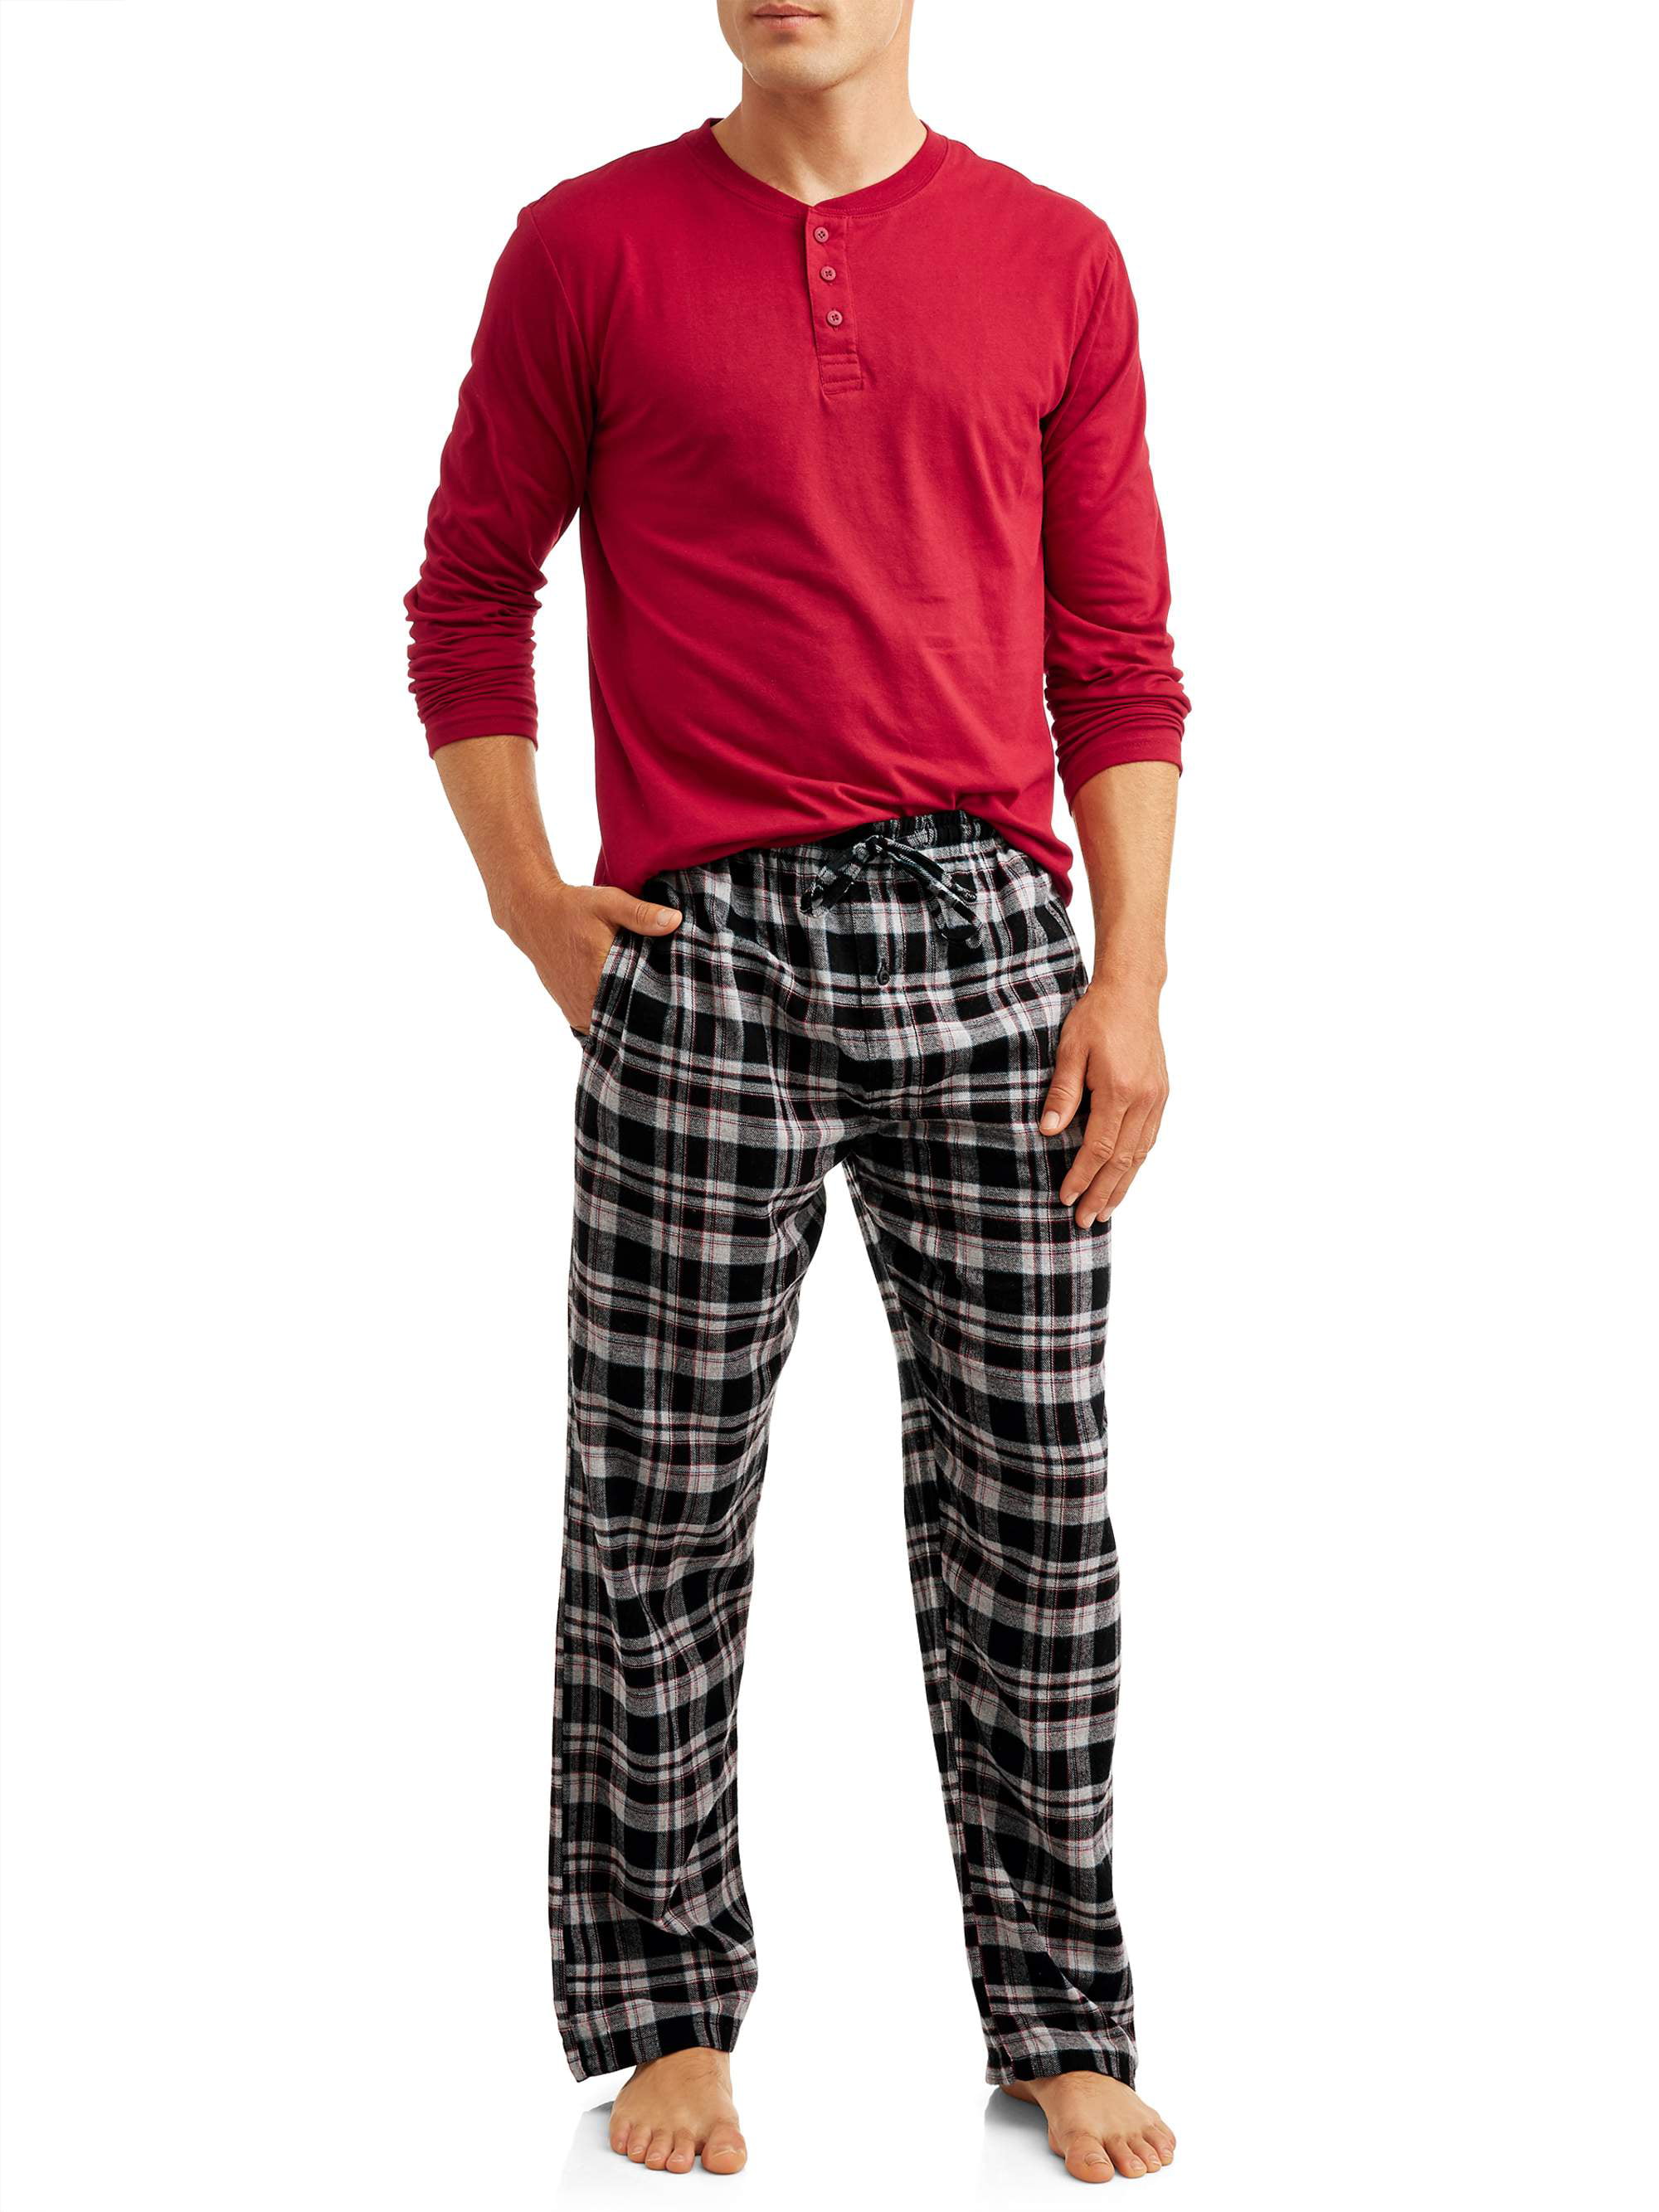 Hanes Men's Long Sleeve Henley Top with Flannel Pant Sleep Set Large 